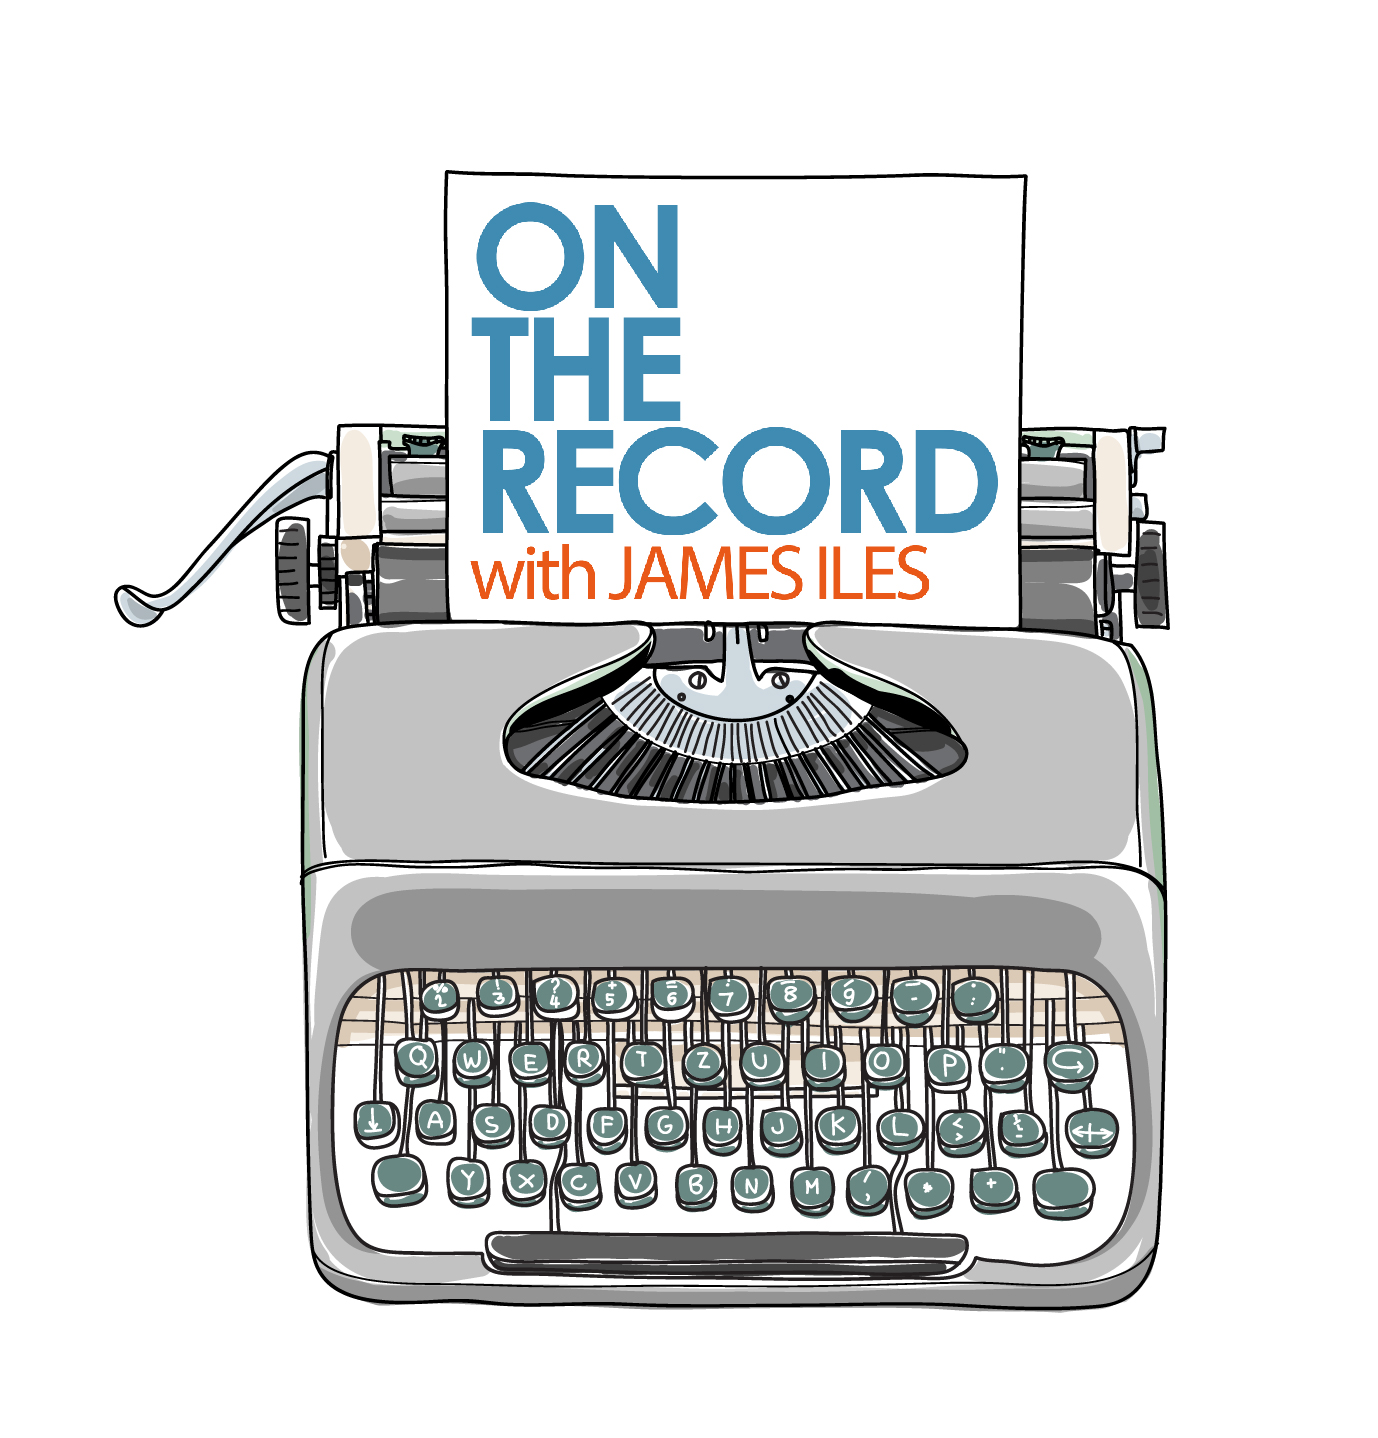 On the Record: Limit.com